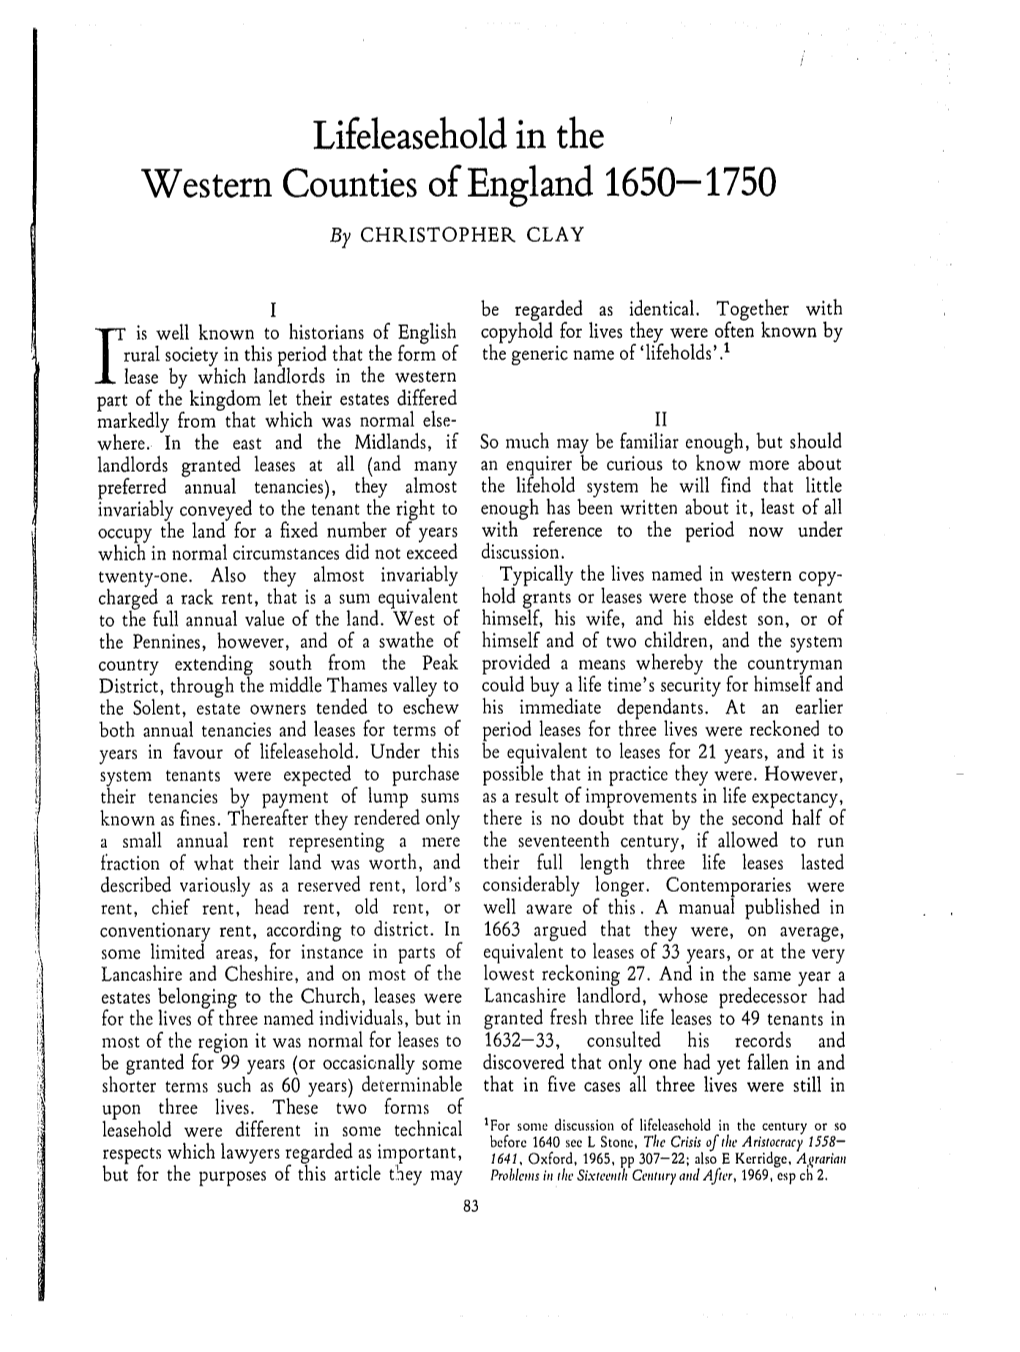 Lifeleasehold in the Western Counties of England 1650-1750